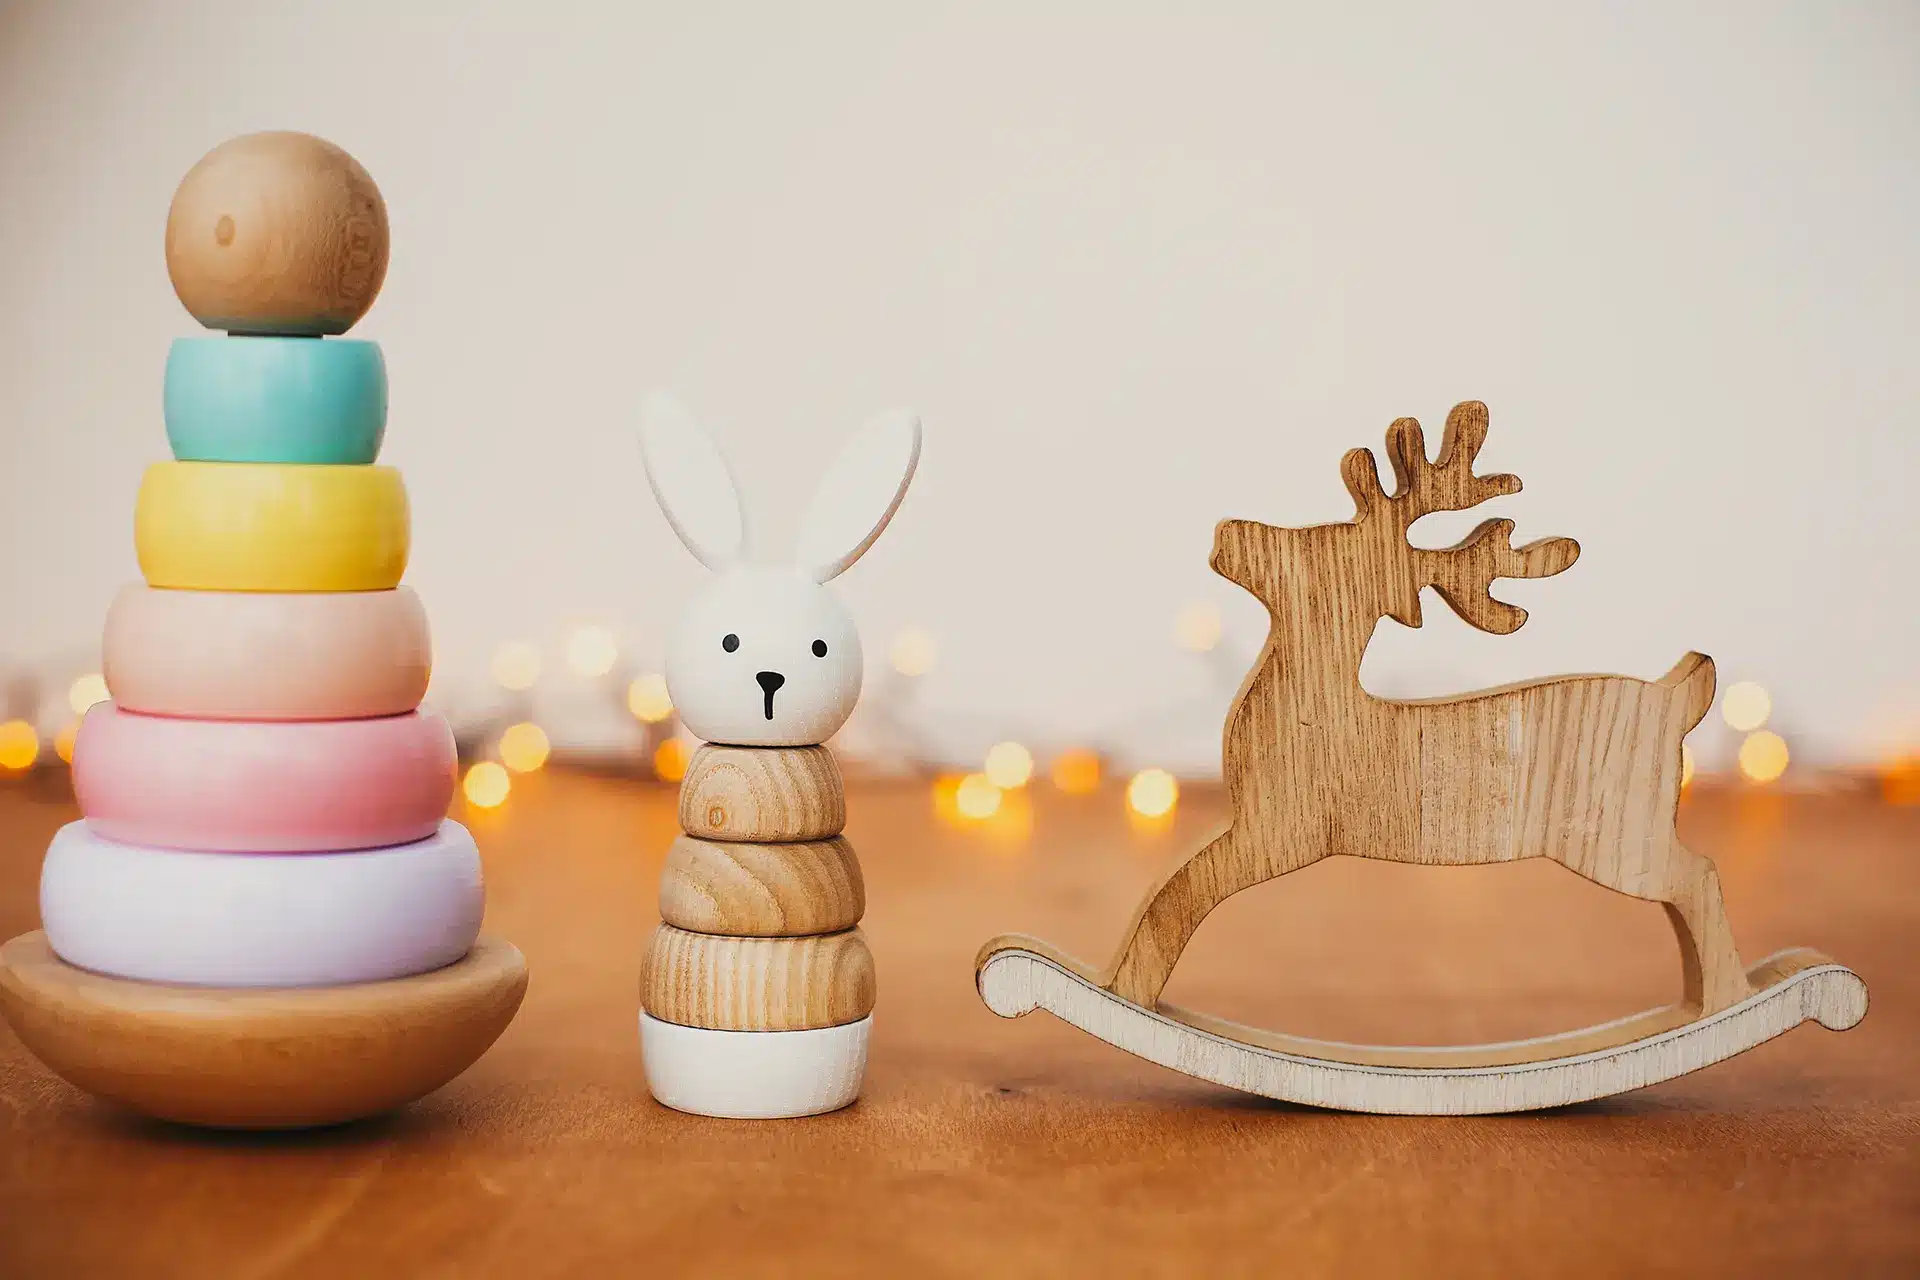 Montessori wooden toys for every age: a playful, caring approach with a rabbit and a reindeer.